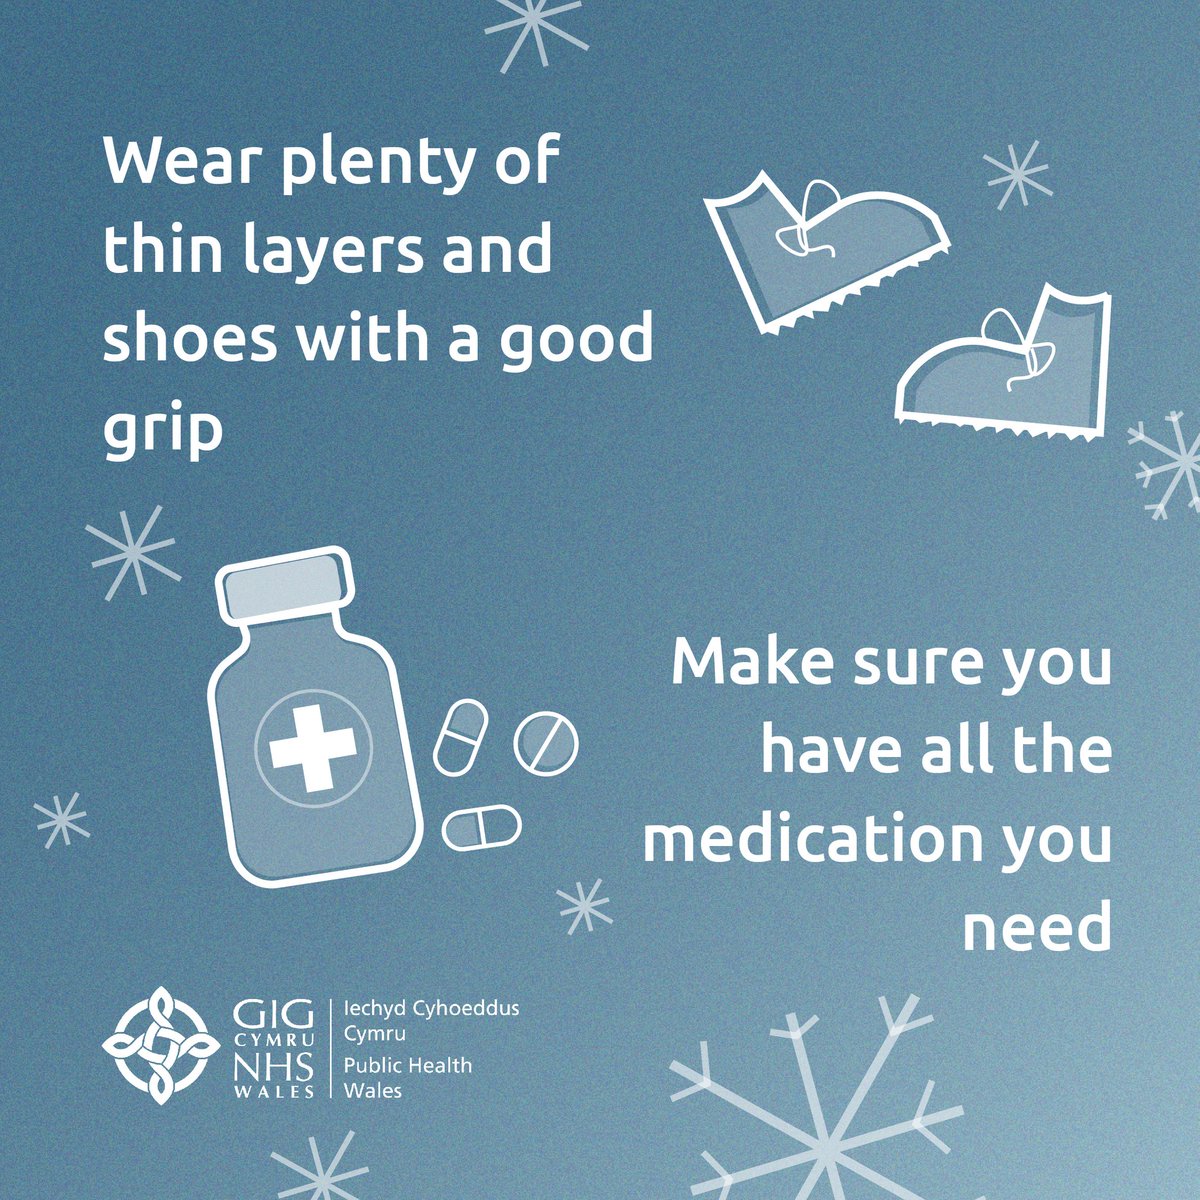 As the cold weather starts to creep in, it's important to keep yourself and others safe. 🧥 Wear plenty of thin layers ☕ Have hot drinks & food throughout the day 💊 Make sure you have all the medication you need 🥰Check in on loved ones 👉ow.ly/VTl950QcVPu